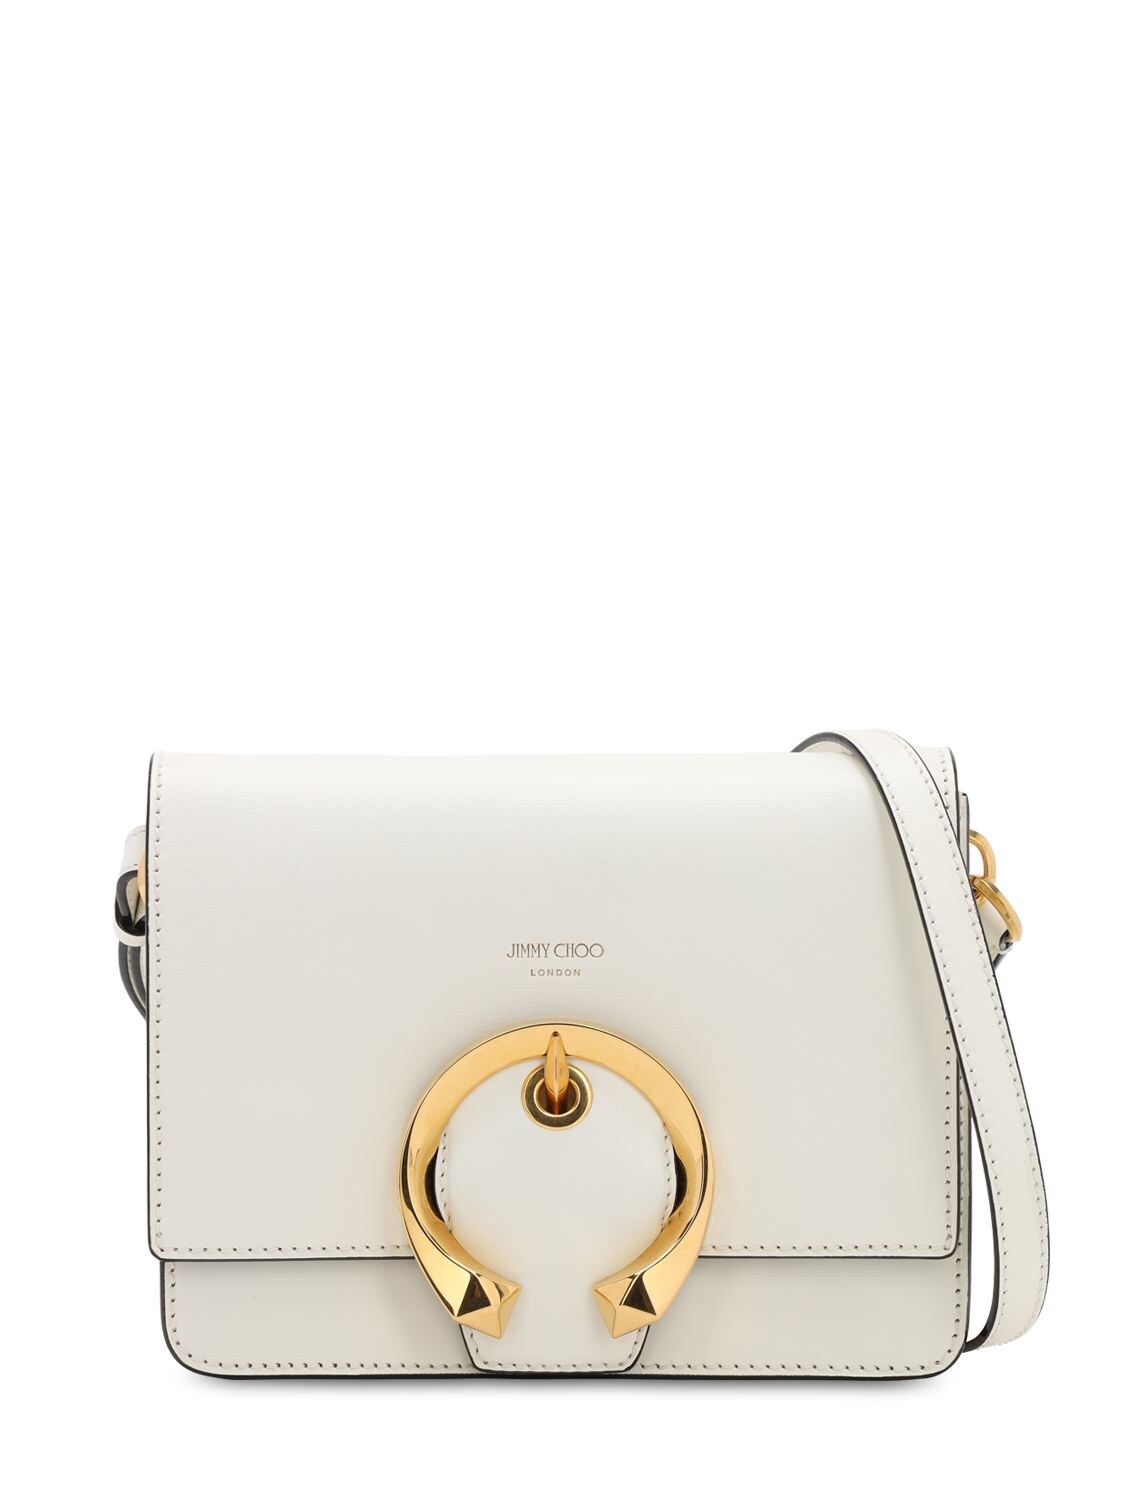 Jimmy Choo Madeline Grained Leather Bag In White